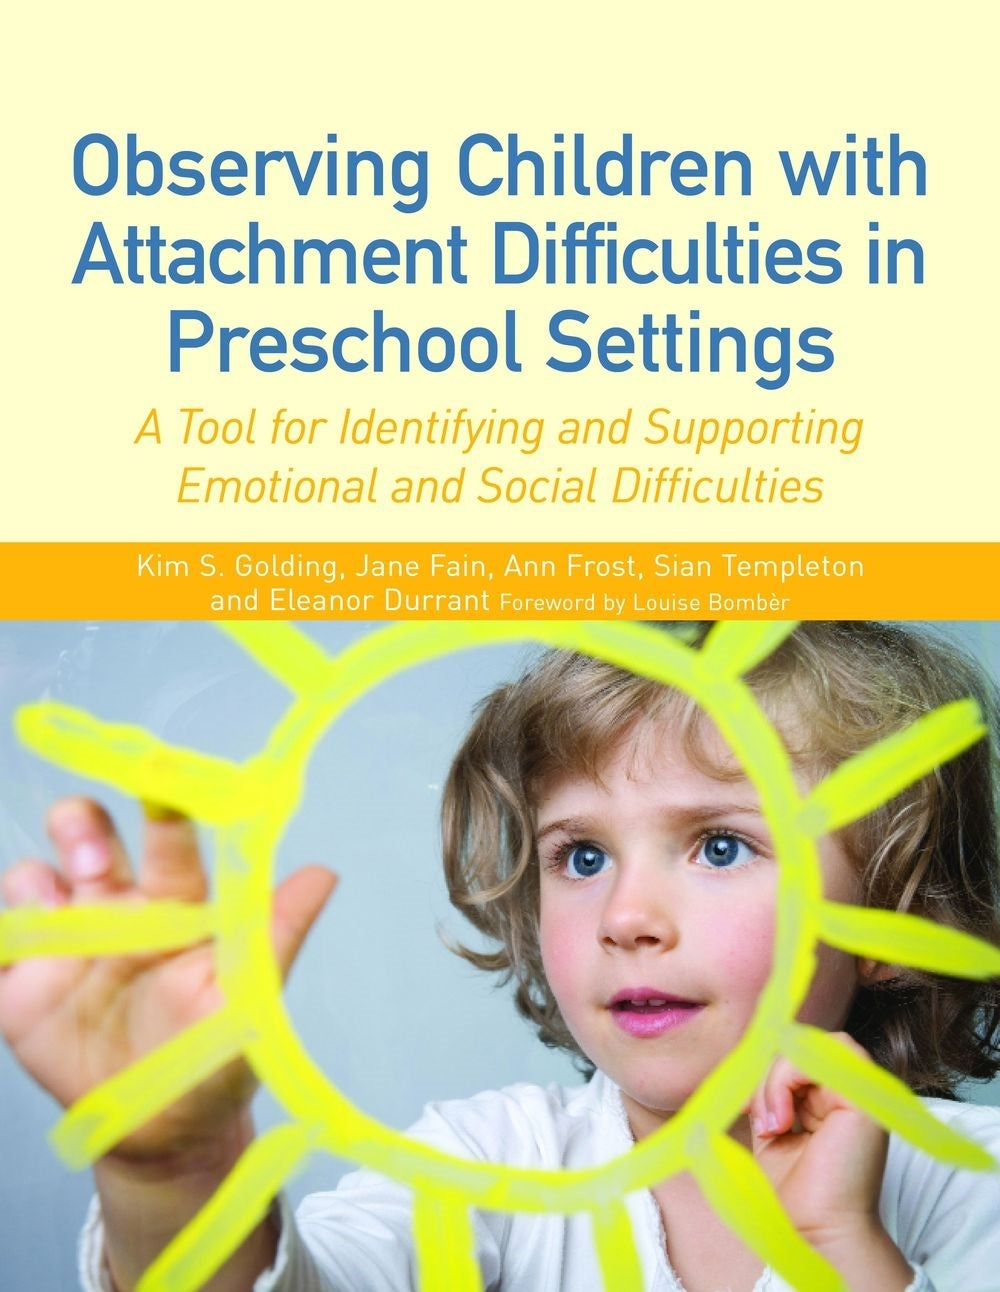 Observing Children with Attachment Difficulties in Preschool Settings by Ann Frost, Jane Fain, Sian Templeton, Eleanor Durrant, Kim S. Golding